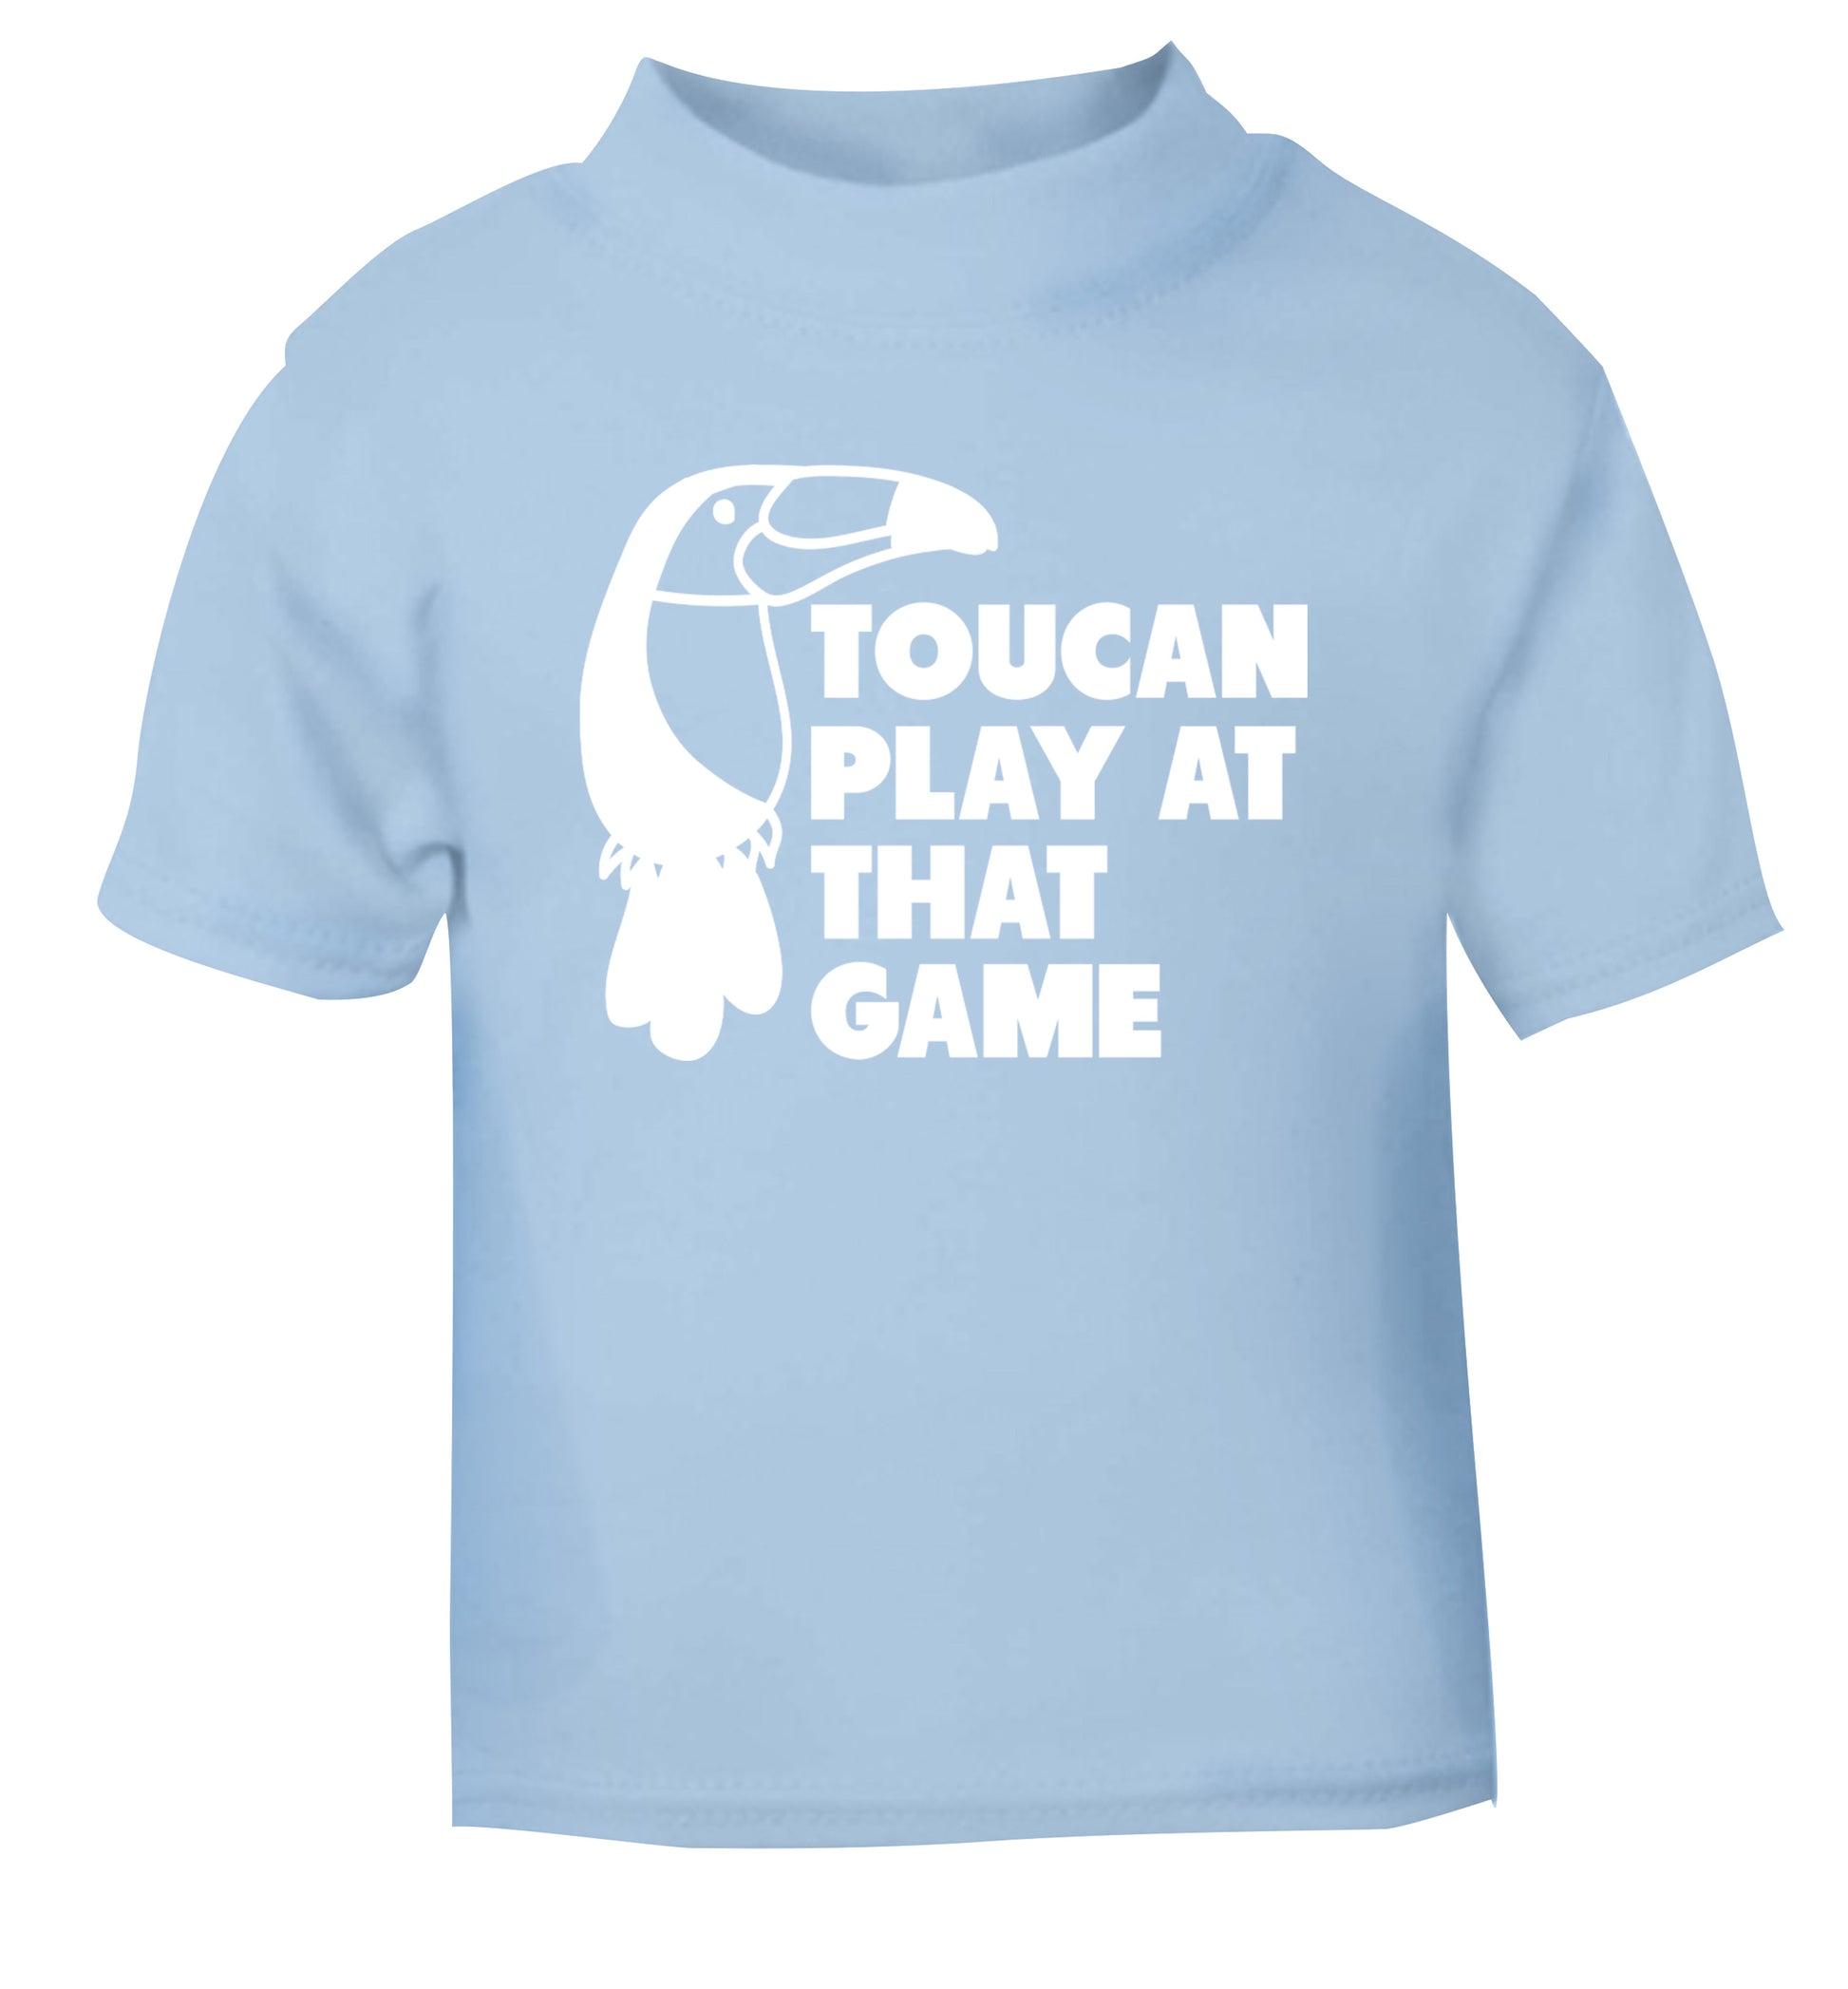 Toucan play at that game light blue Baby Toddler Tshirt 2 Years